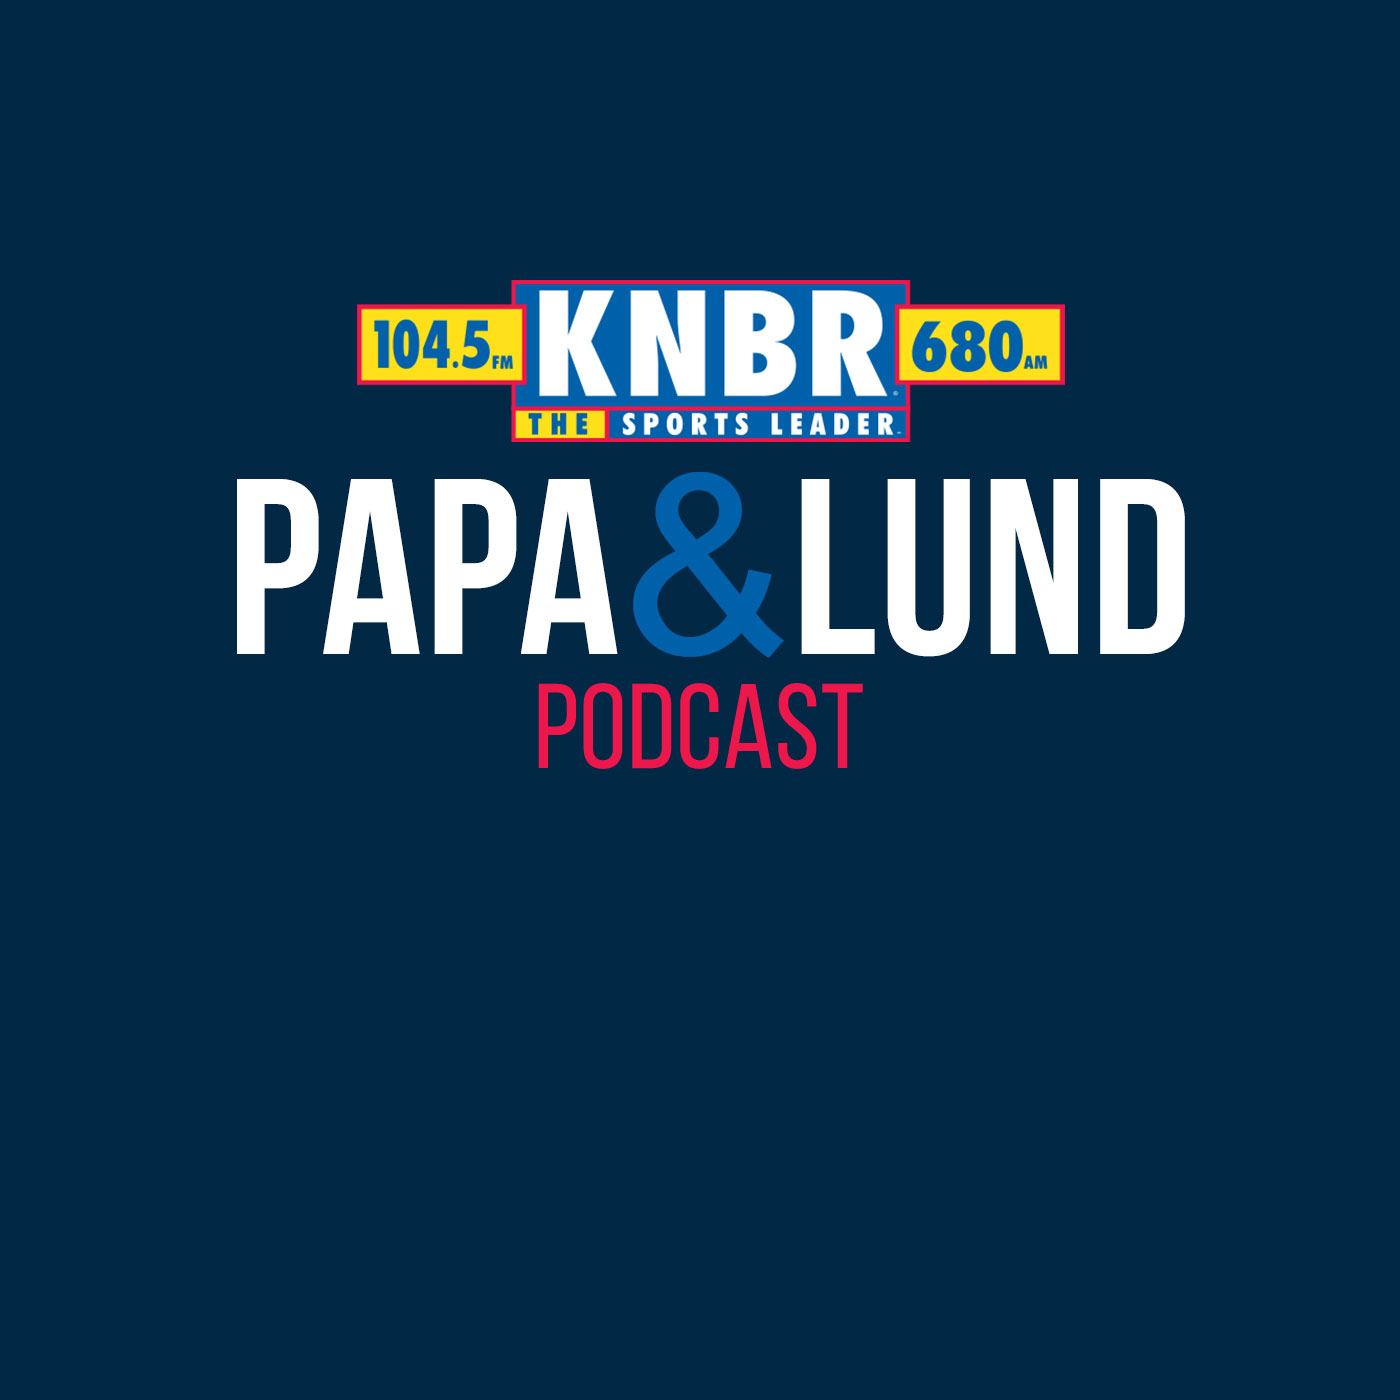 12-24 Akash Anavarathan joins Papa & Lund with Dieter Kurtenbach  to discuss where the 49ers can go following a tough loss to the Titans and what the road to the playoffs may look like